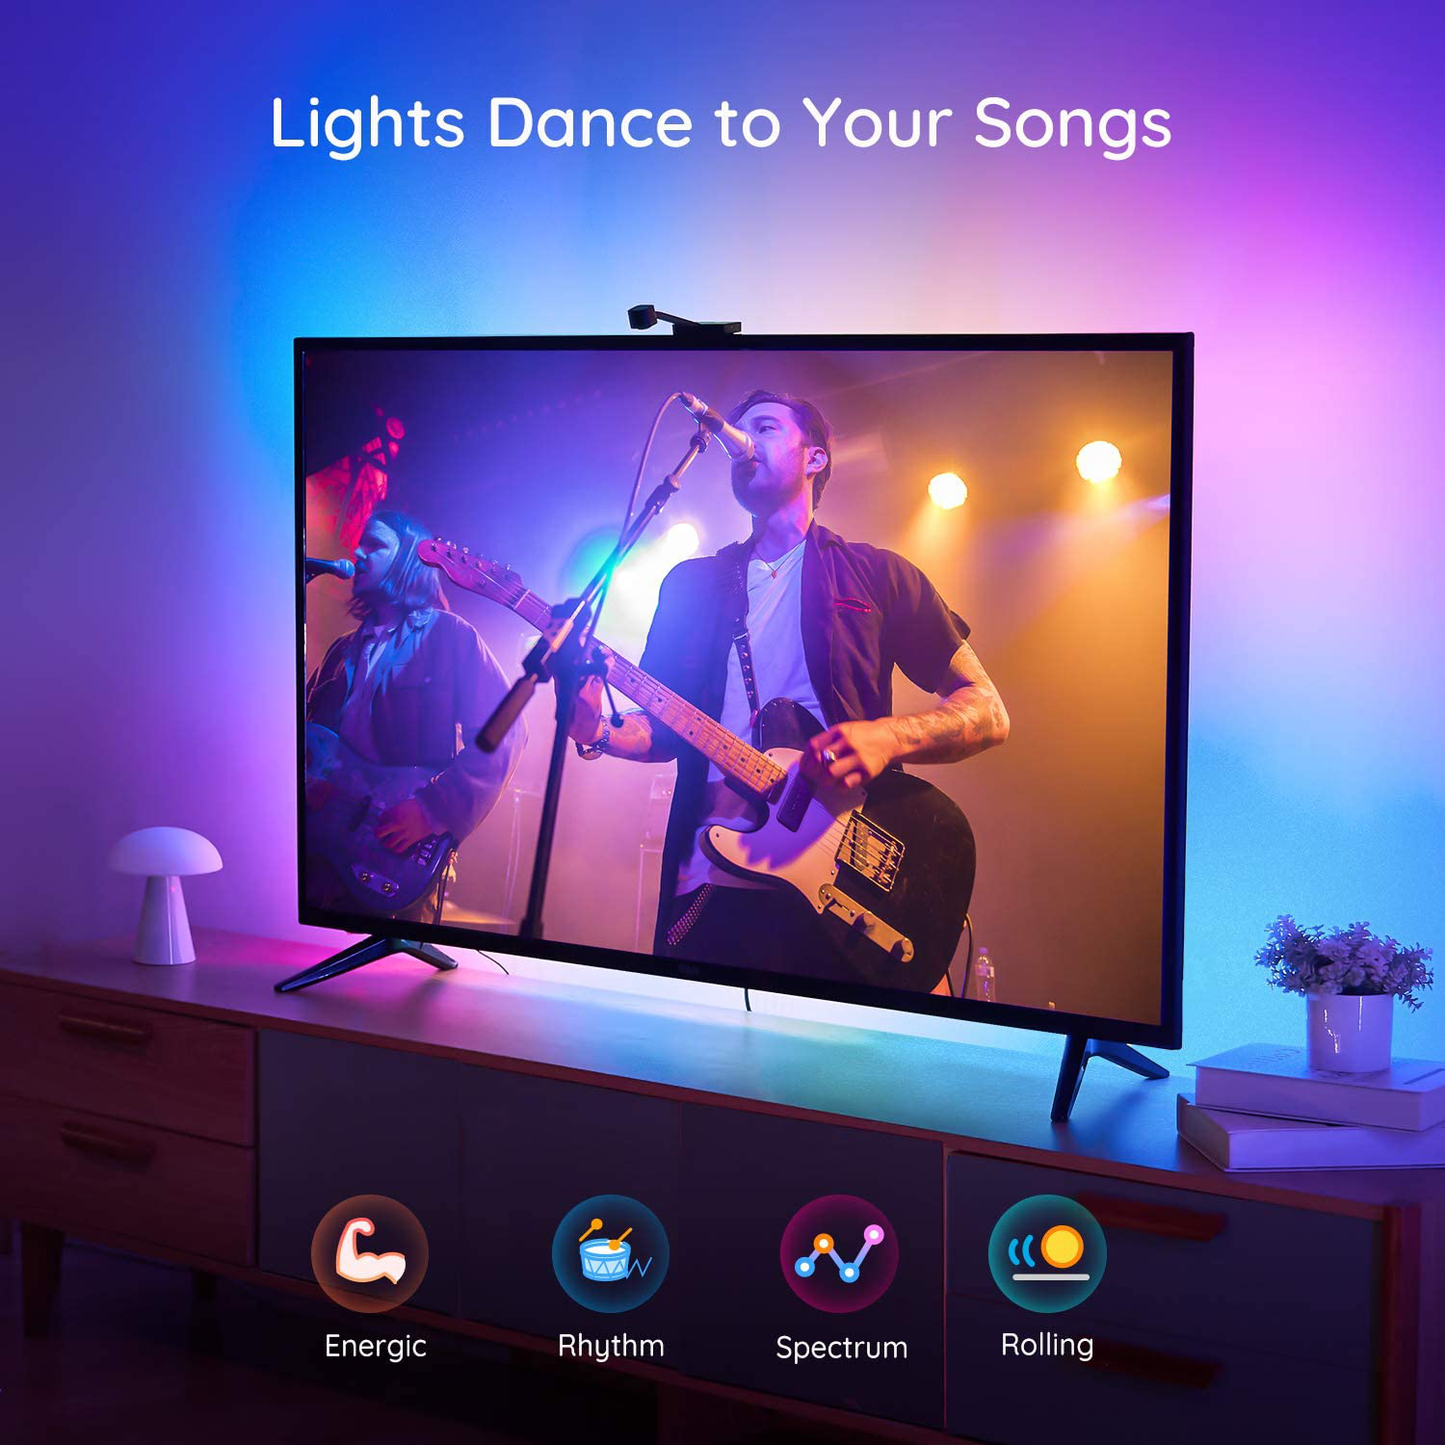 Govee Immersion TV LED Backlights with Camera, RGBIC Ambient Wi-Fi TV Backlights for 55-65 inch TVs PC, Works with Alexa & Google Assistant, App Control, Lights and Music Sync, Adapter